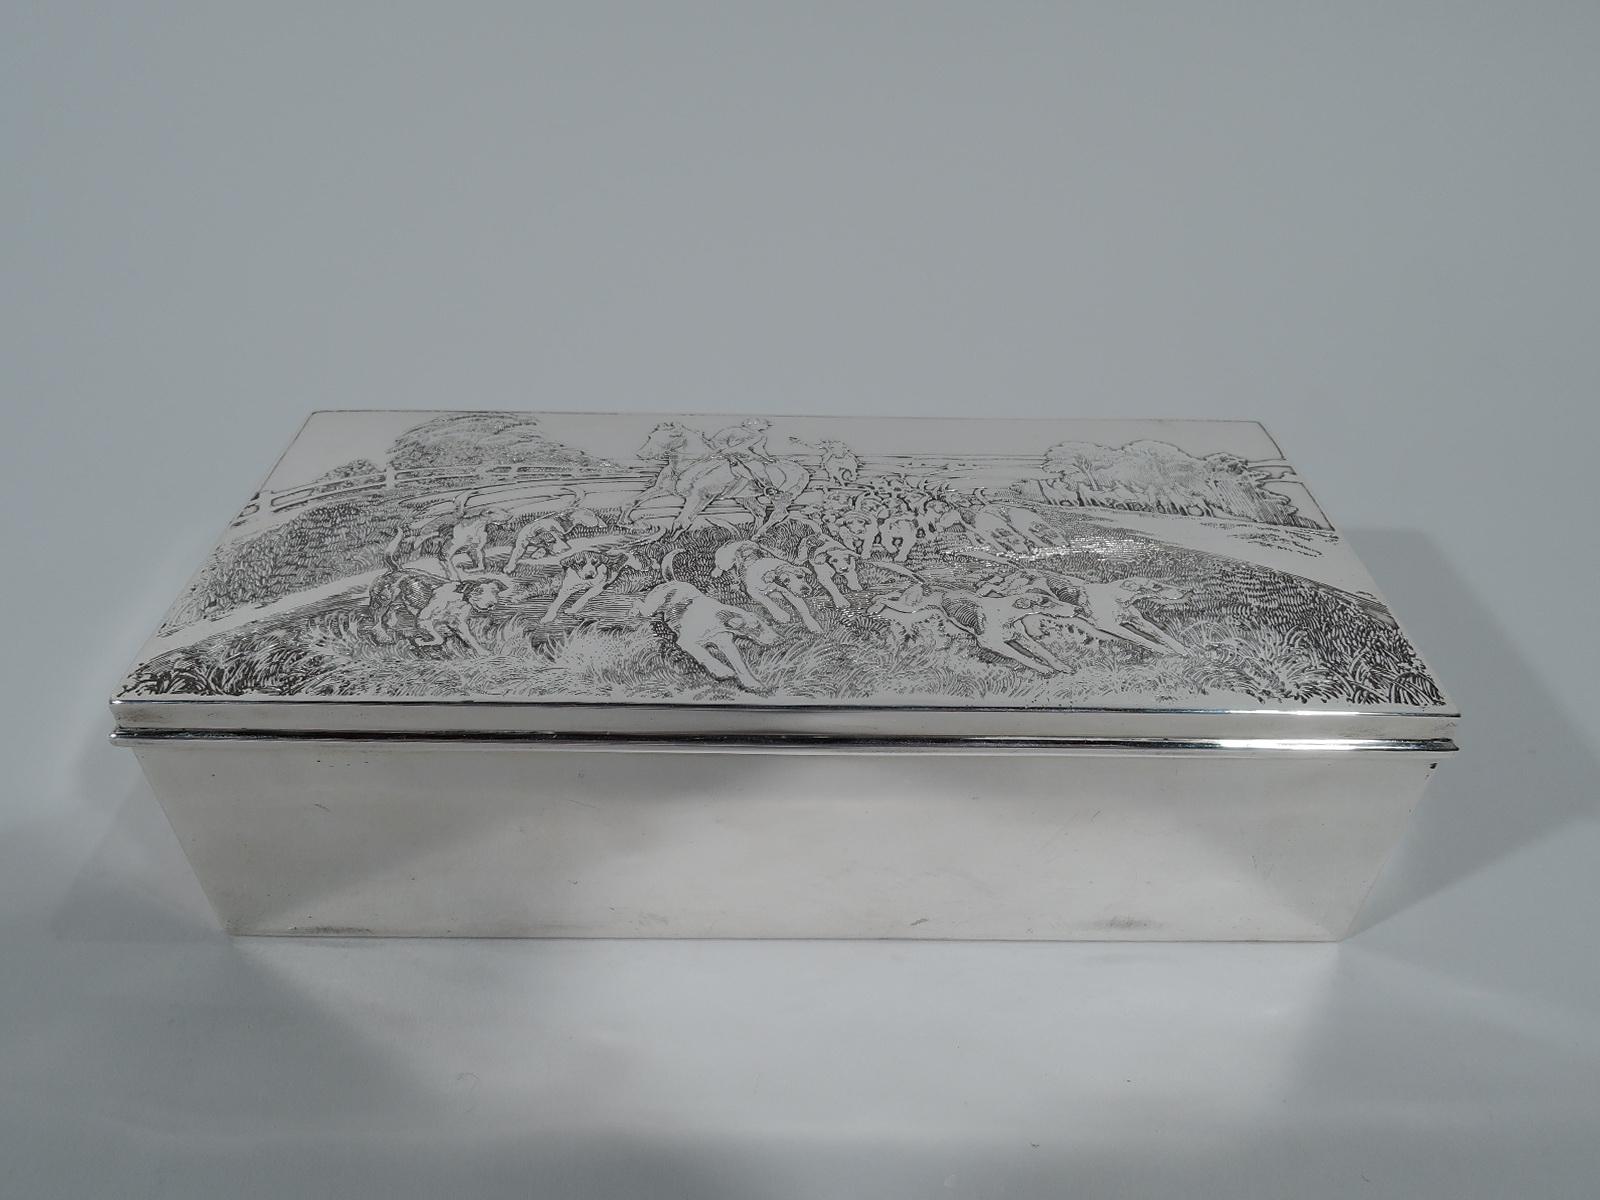 American Edwardian sterling silver box with hunt motif. Rectangular with straight sides and hinged cover. On cover is dense tableaux with hounds in pursuit followed by a mounted hunter who looks back at another wielding a whip. Box interior